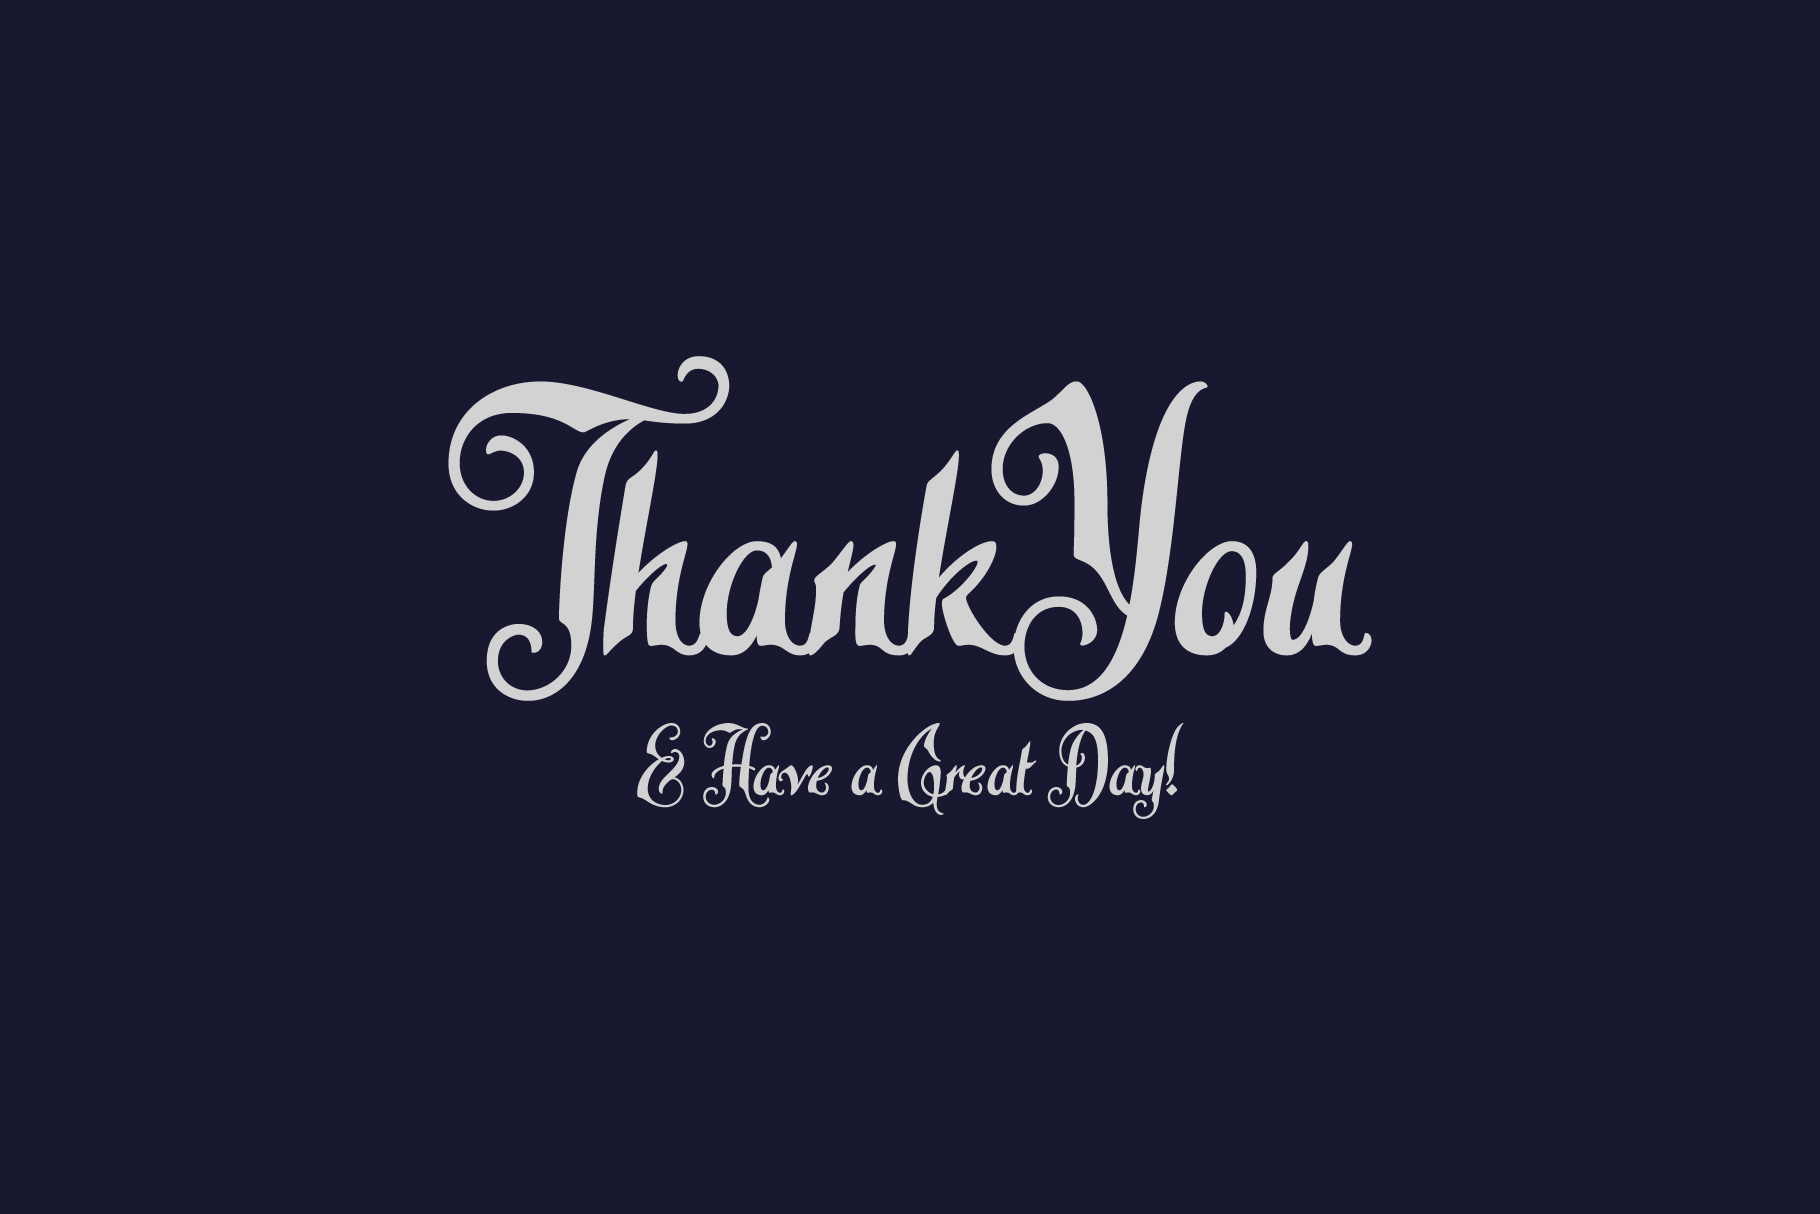 Thank you phrase using Late Frost Font.